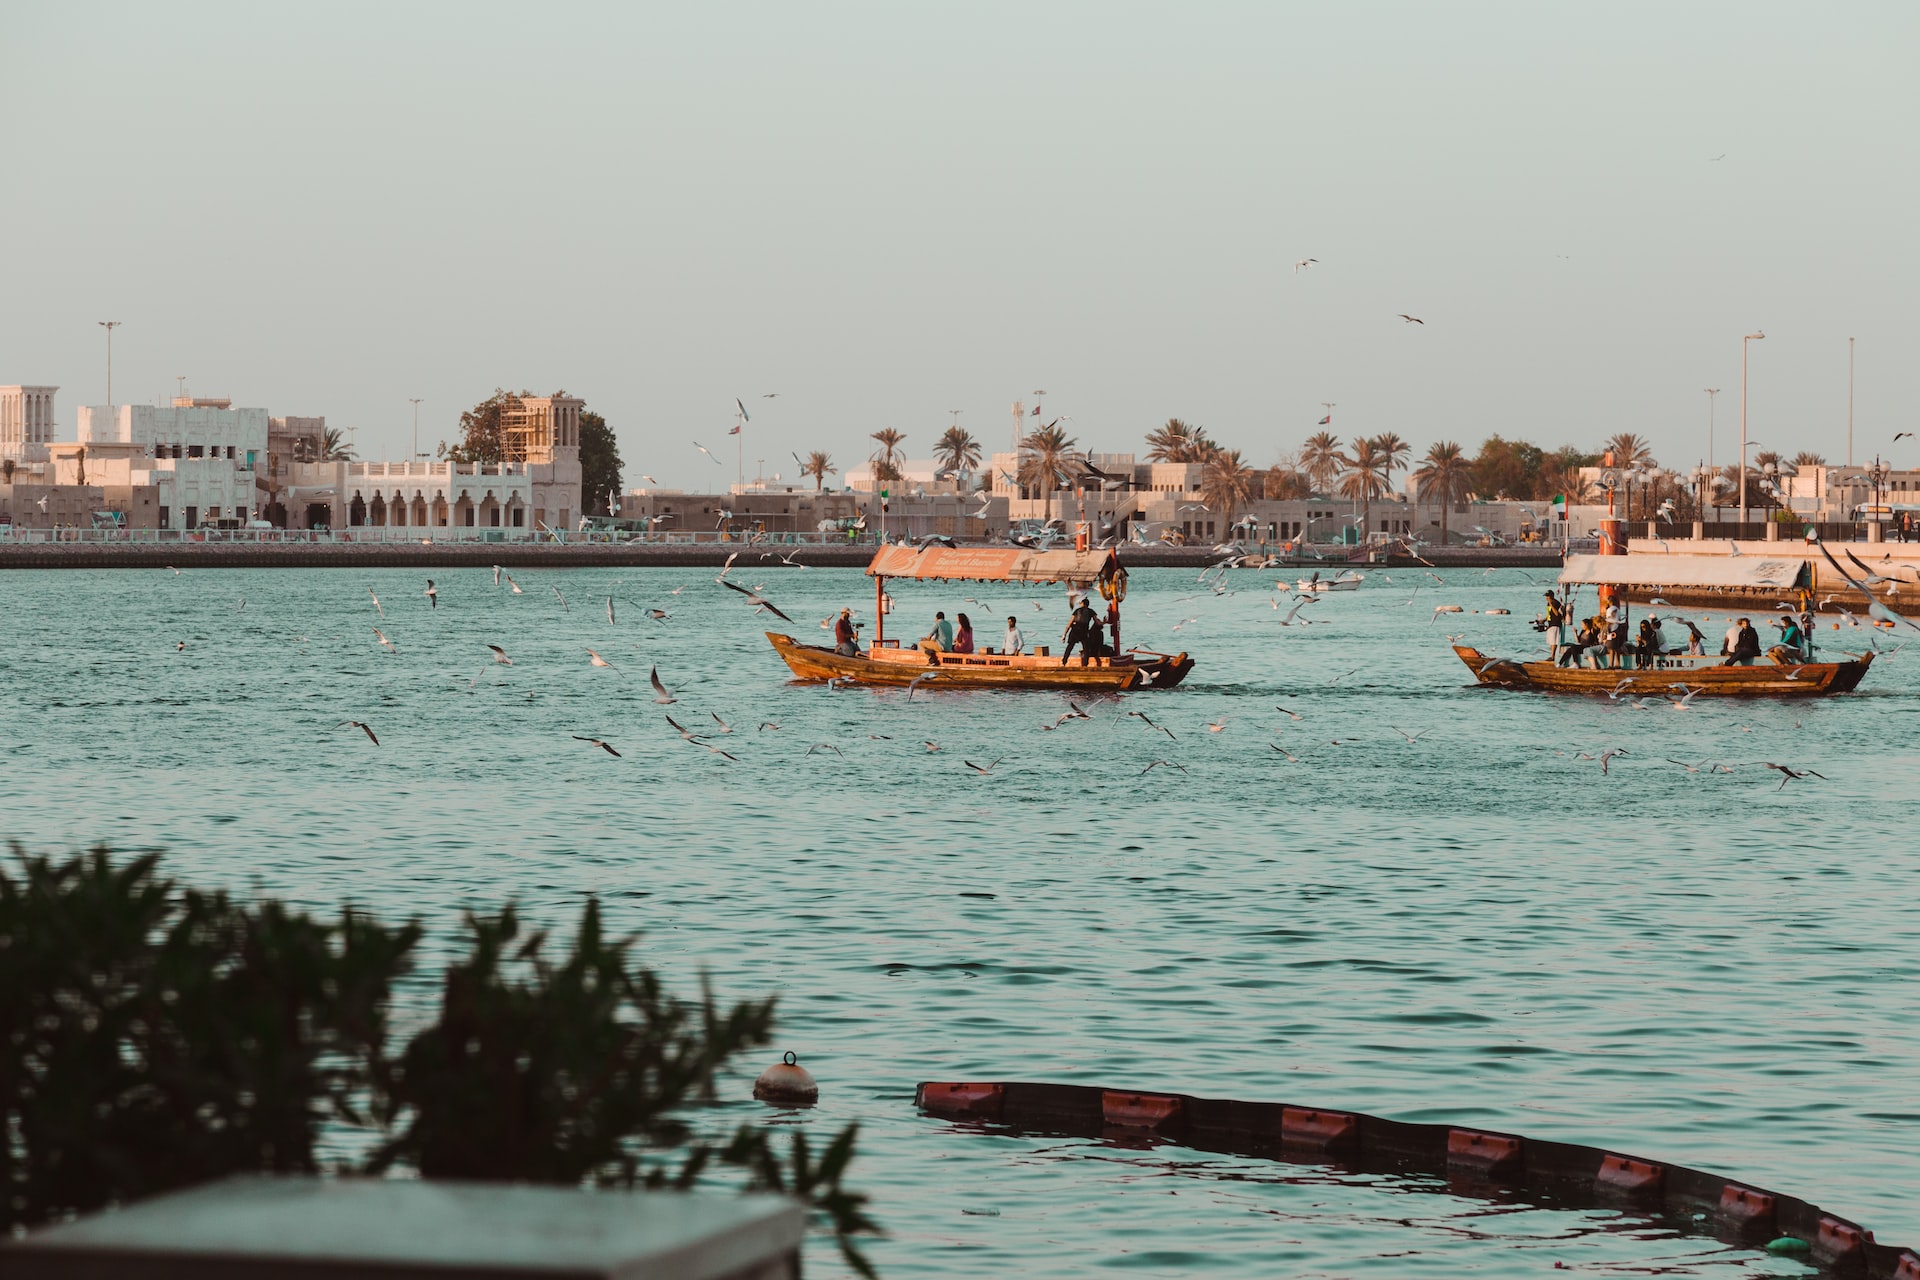 An Abra is a traditional boat used to cross the Dubai Creek.